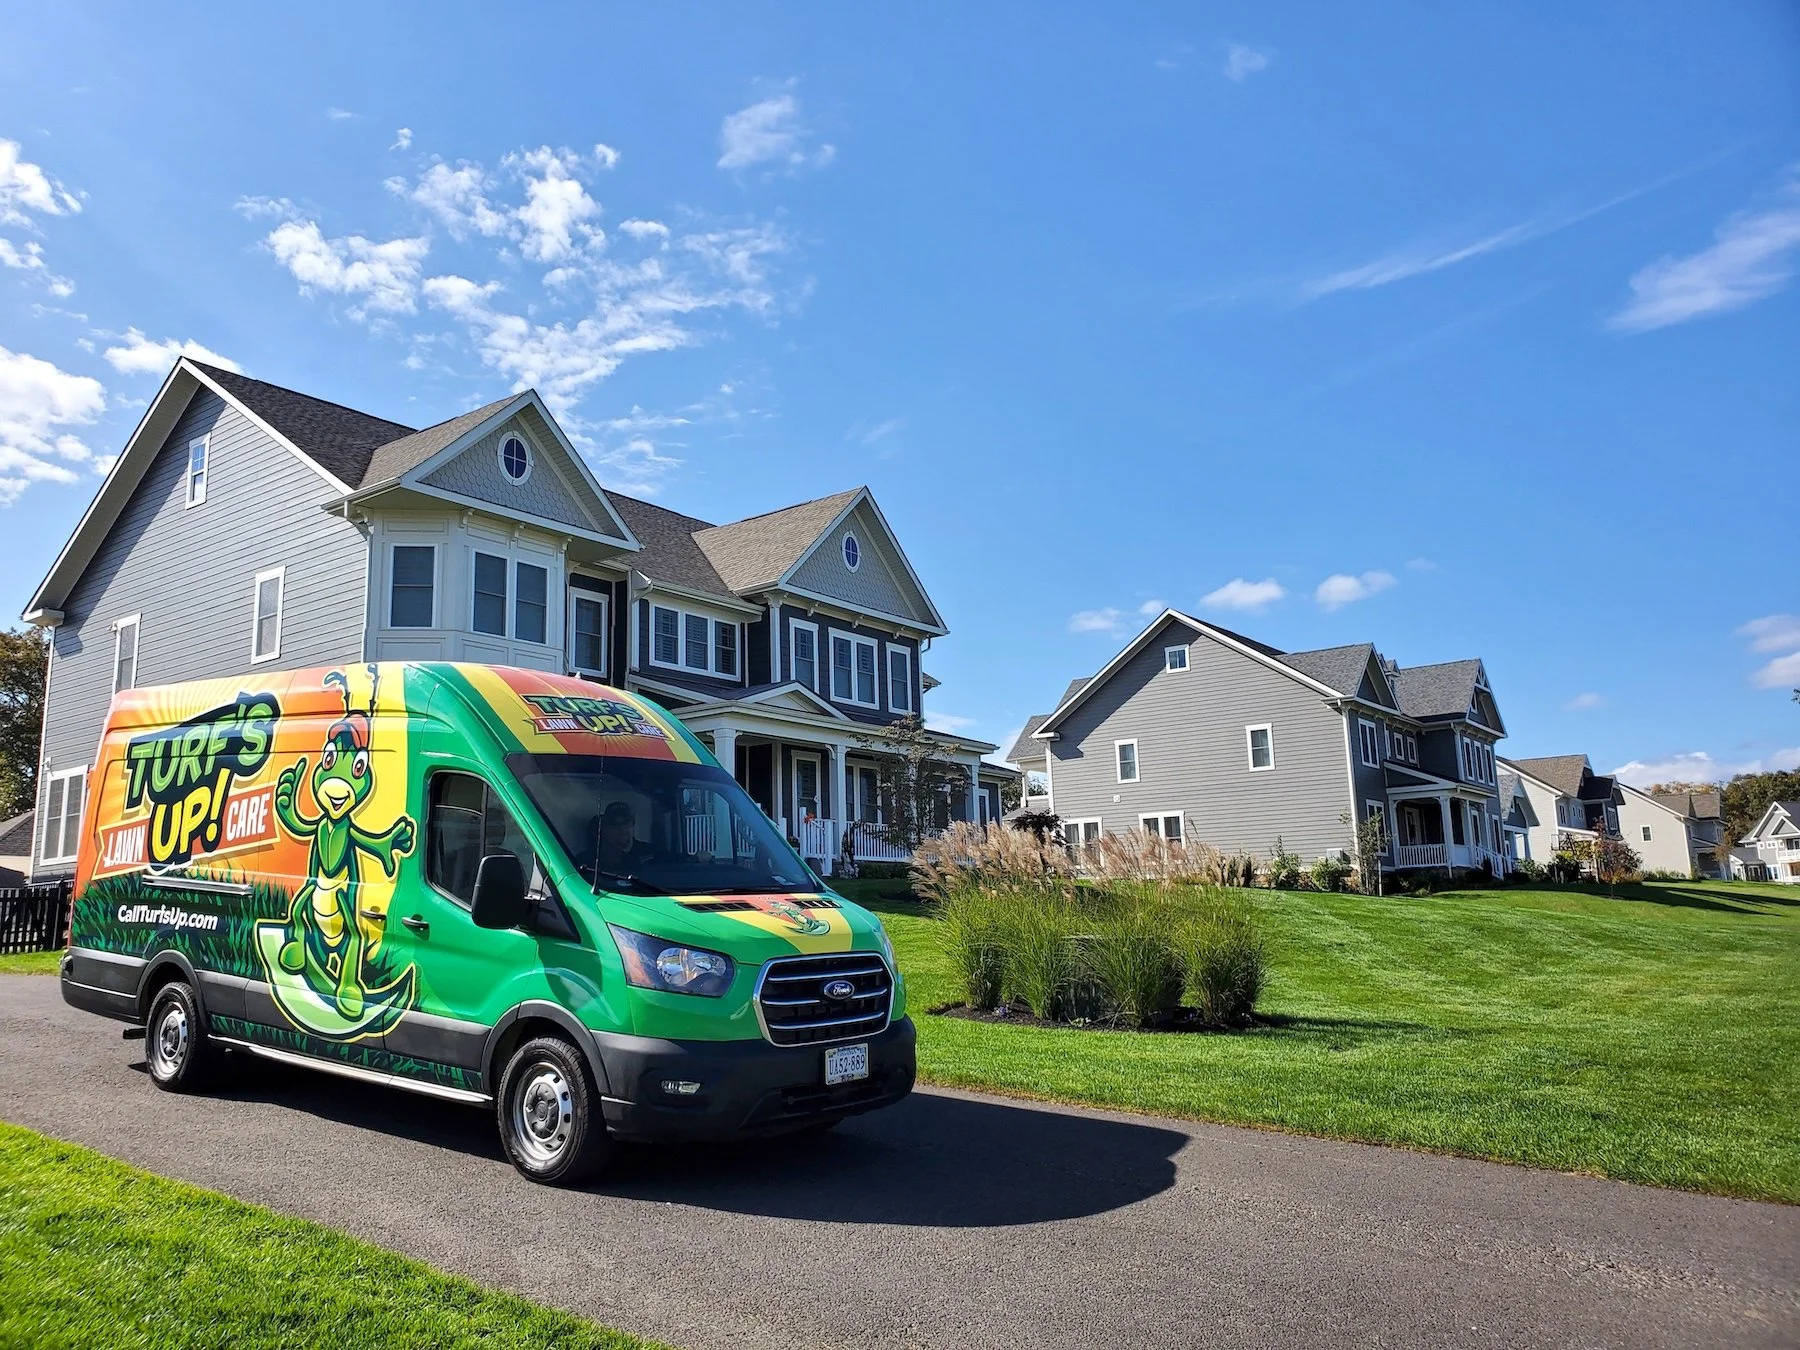 Turf's Up lawn care and pest control van